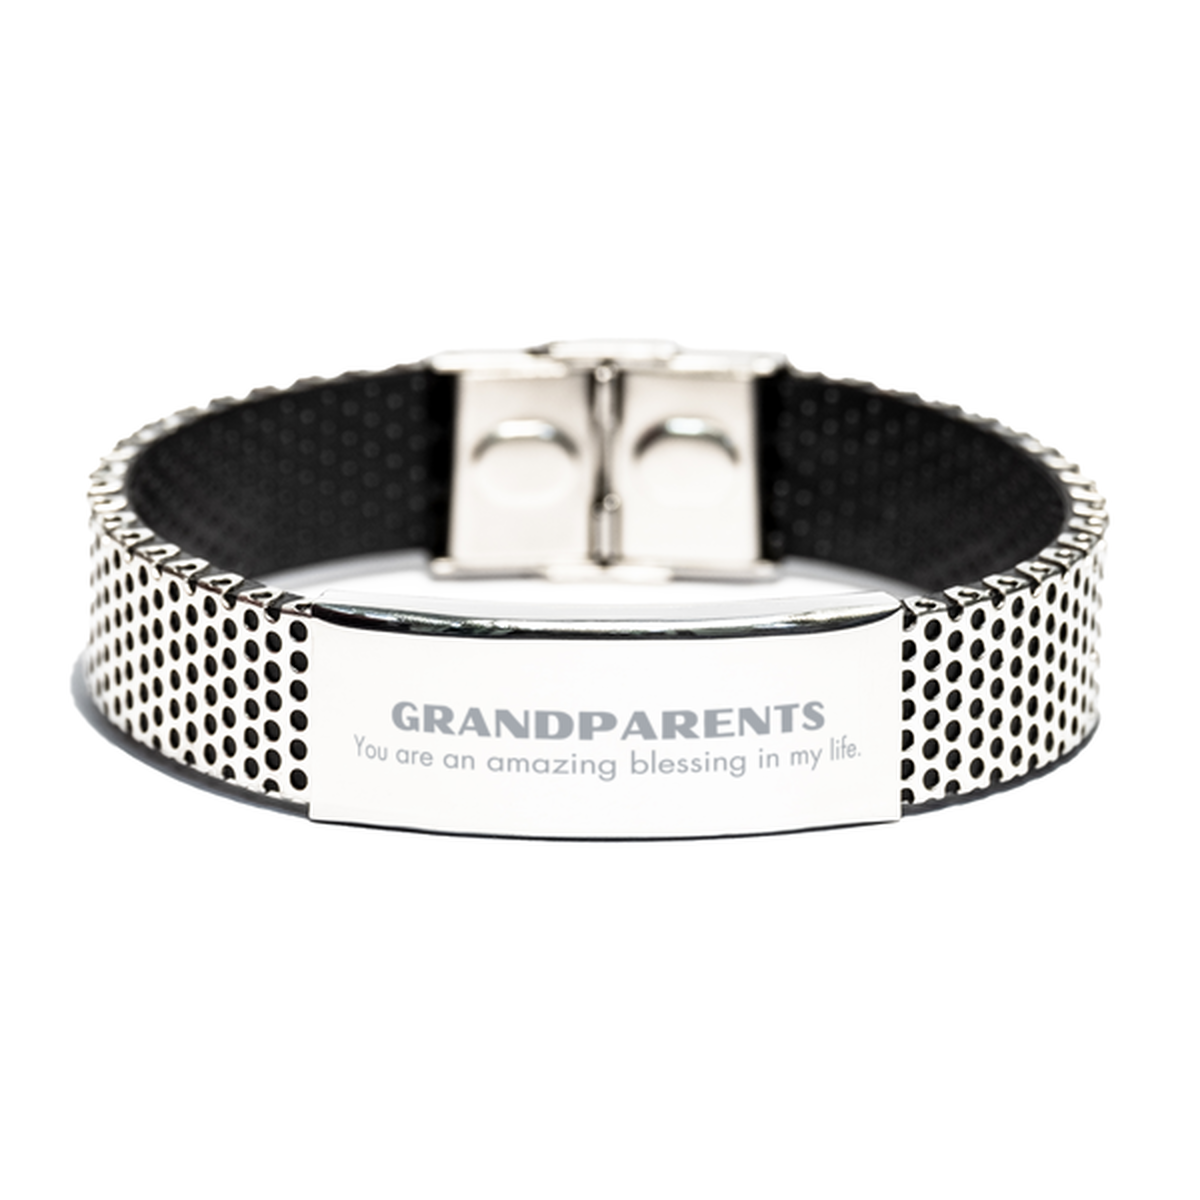 Grandparents Stainless Steel Bracelet, You are an amazing blessing in my life, Thank You Gifts For Grandparents, Inspirational Birthday Christmas Unique Gifts For Grandparents